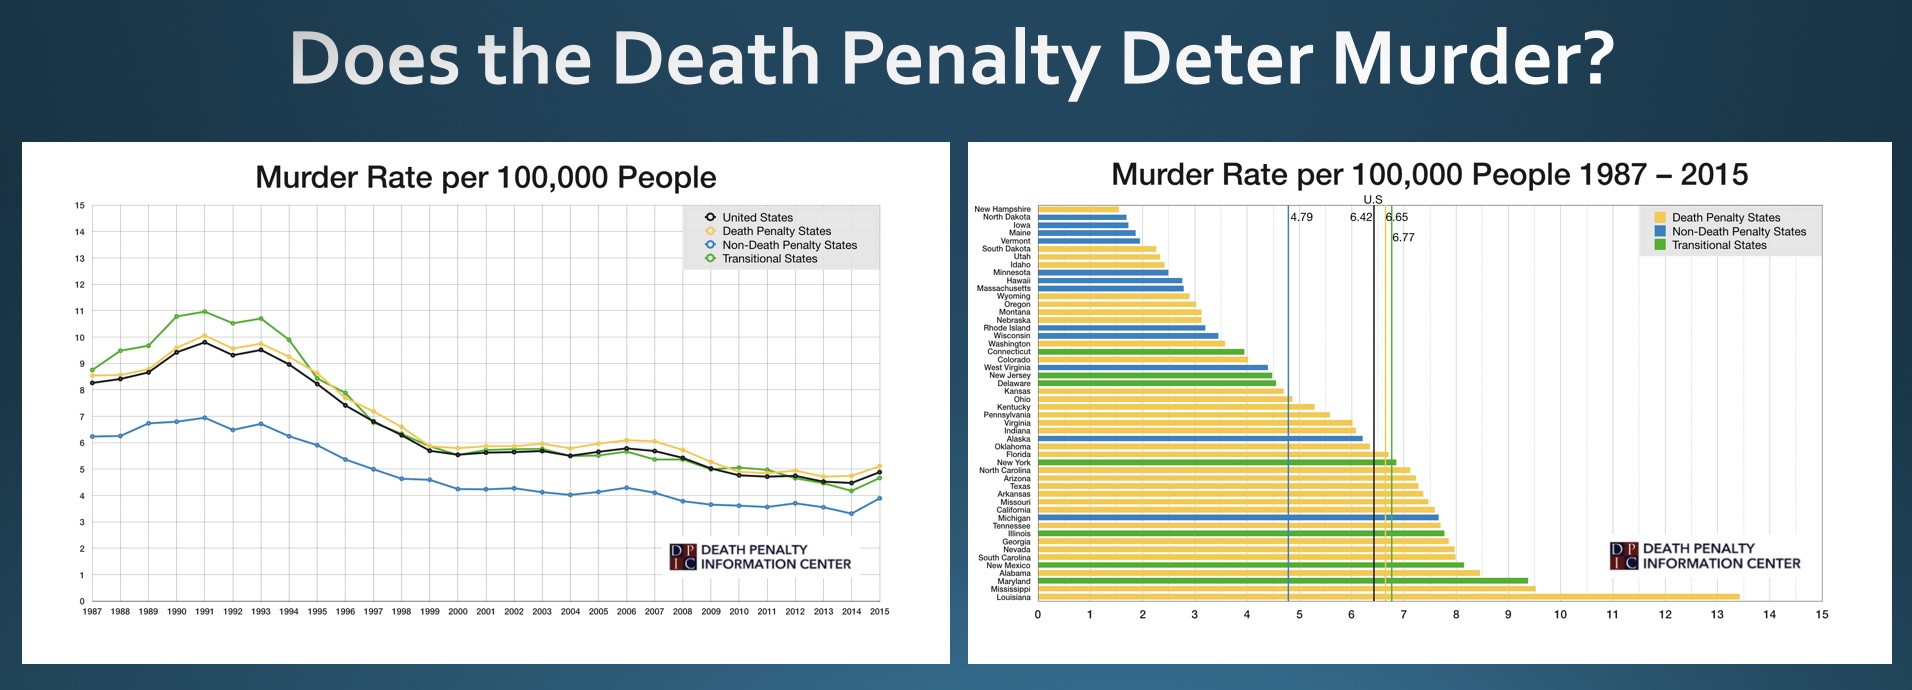 Study: 88% of criminologists do not believe the death penalty is an effective deterrent